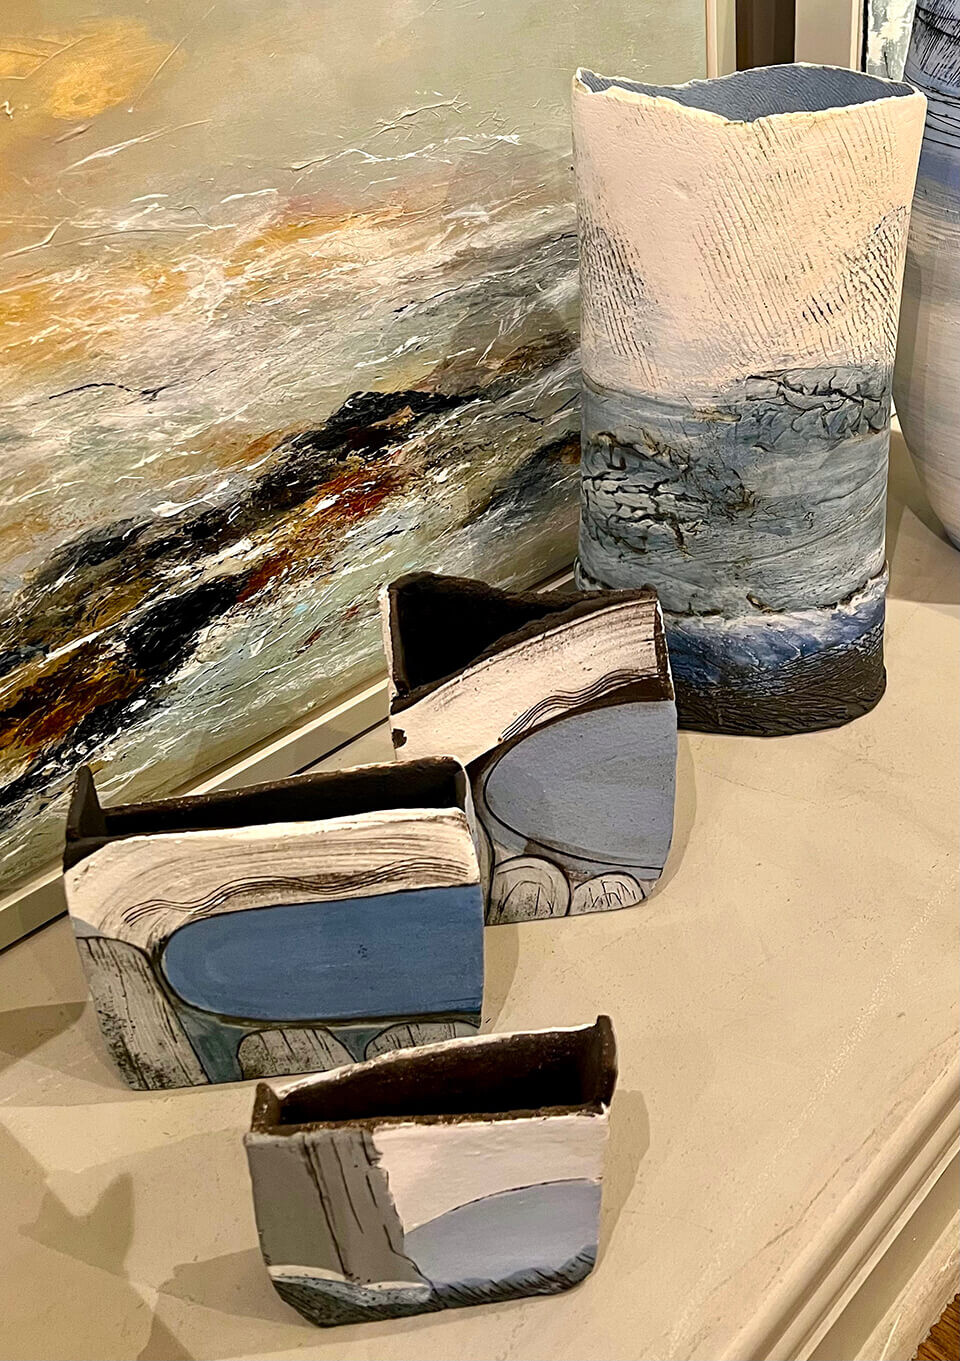 Wendy Farley 'Coastal' slab and coil pots with oxides and underglazes